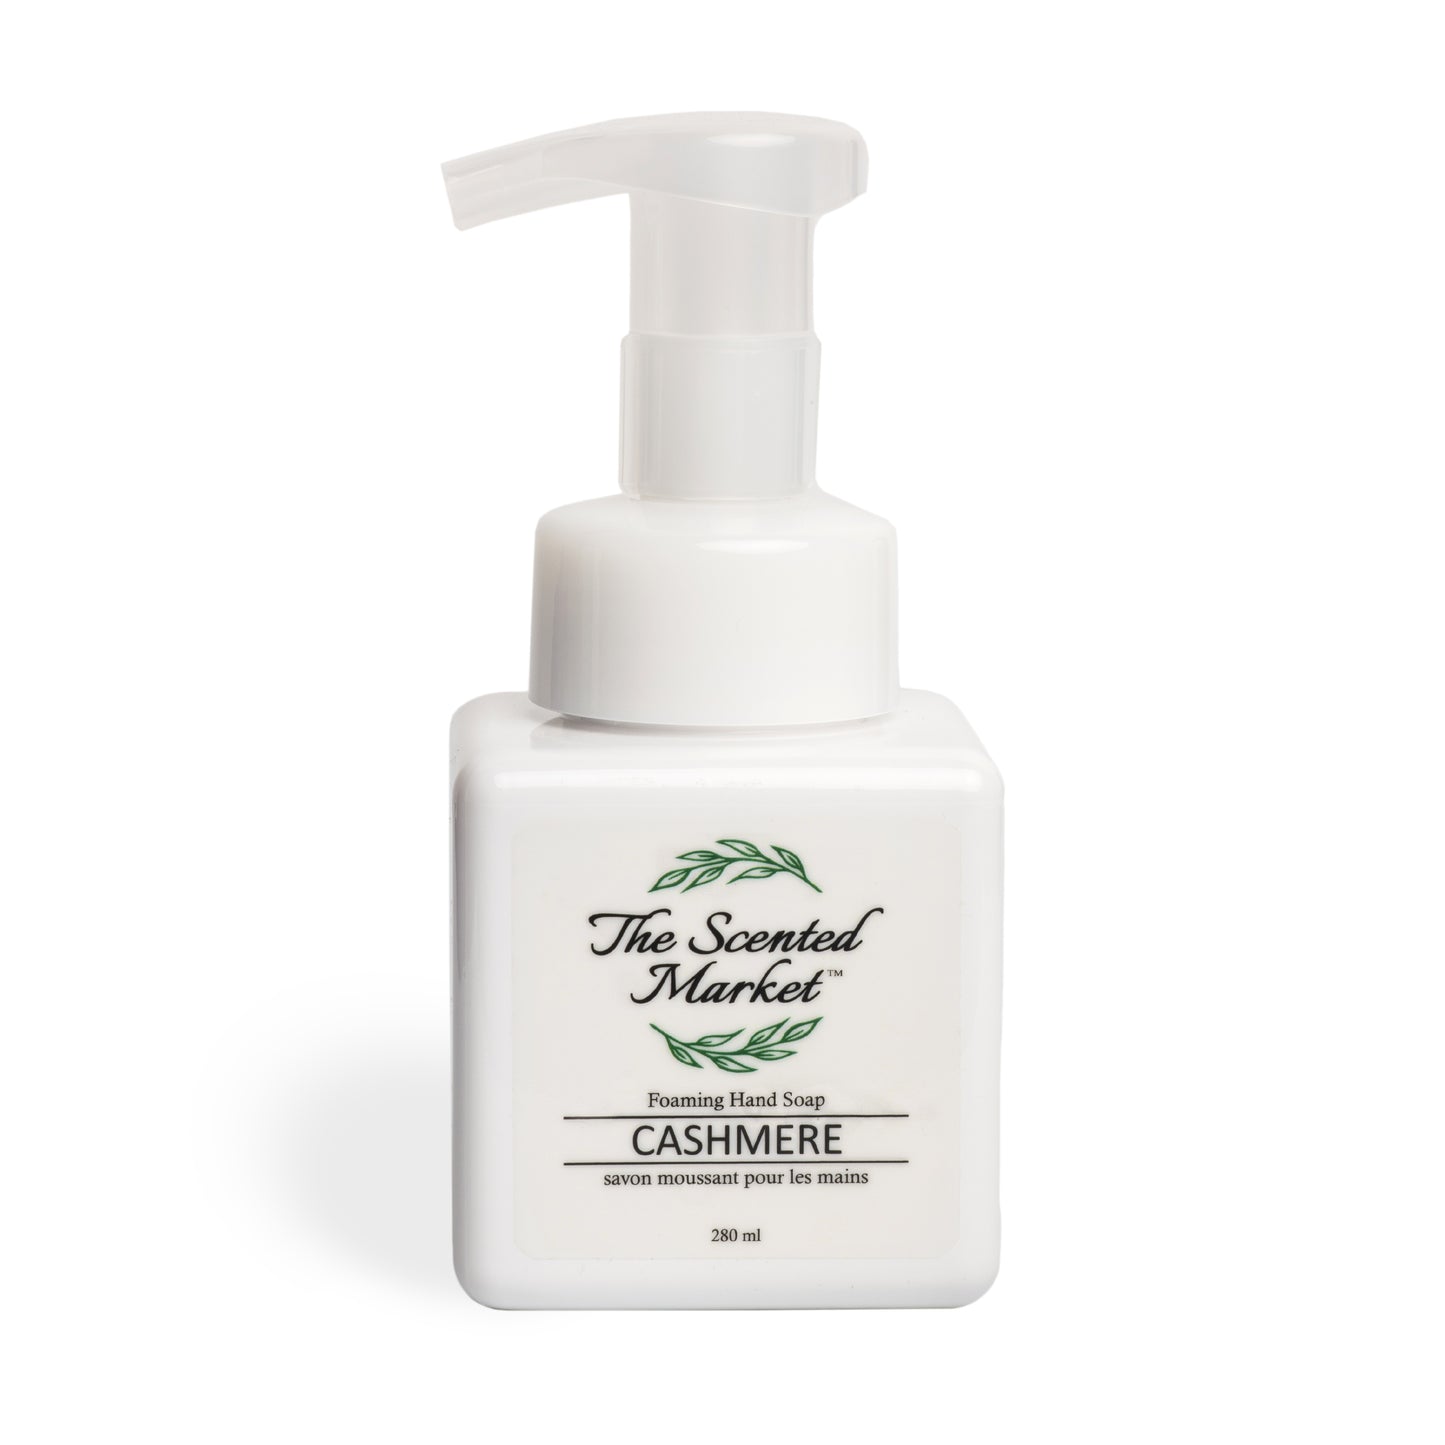 CASHMERE Foaming Hand Soap